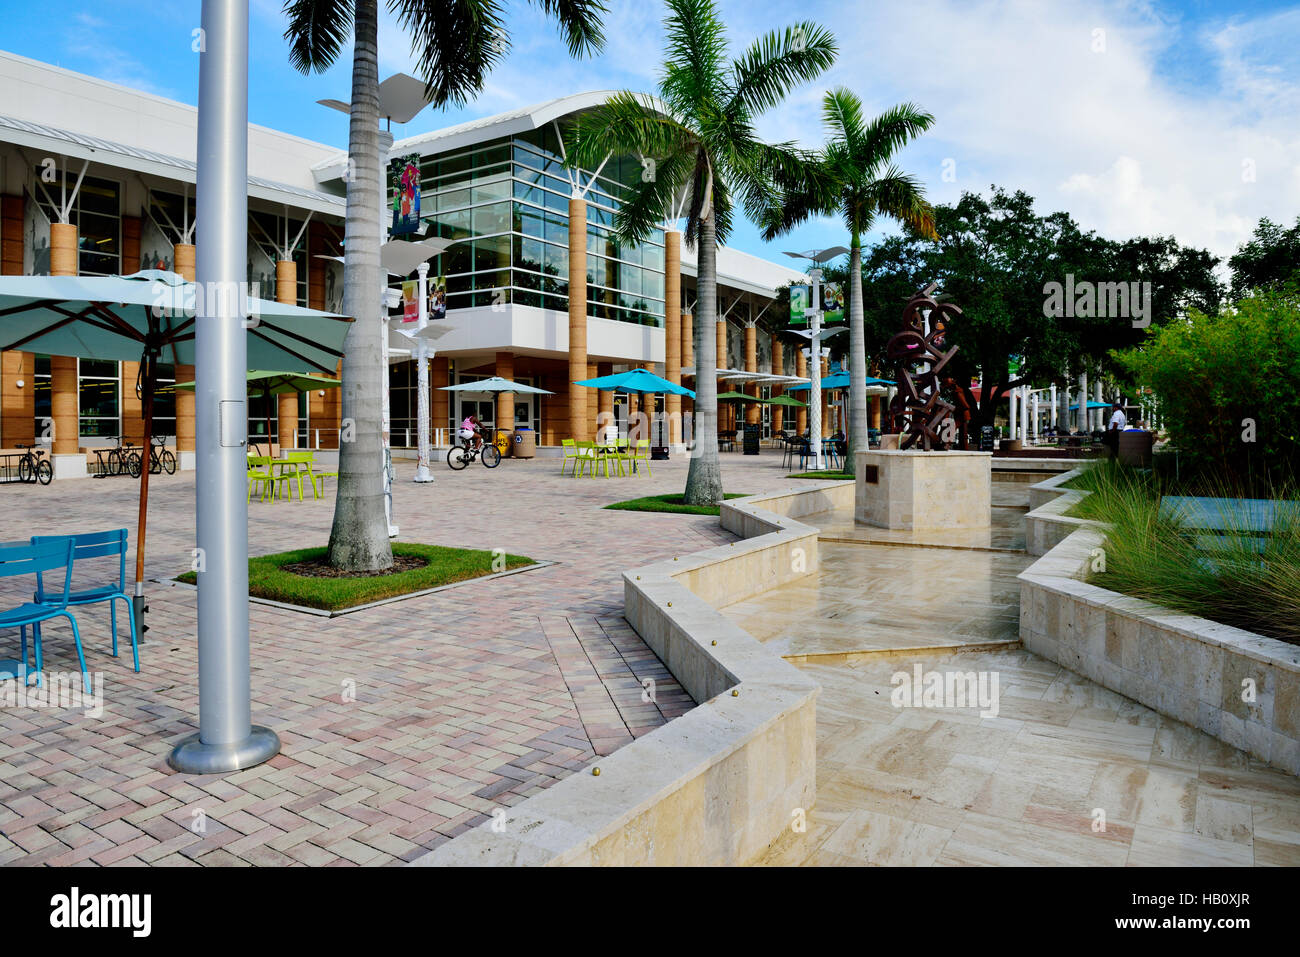 Fort Myers Regional Library and Cornog Plaza, Fort Myers, Florida Stock Photo